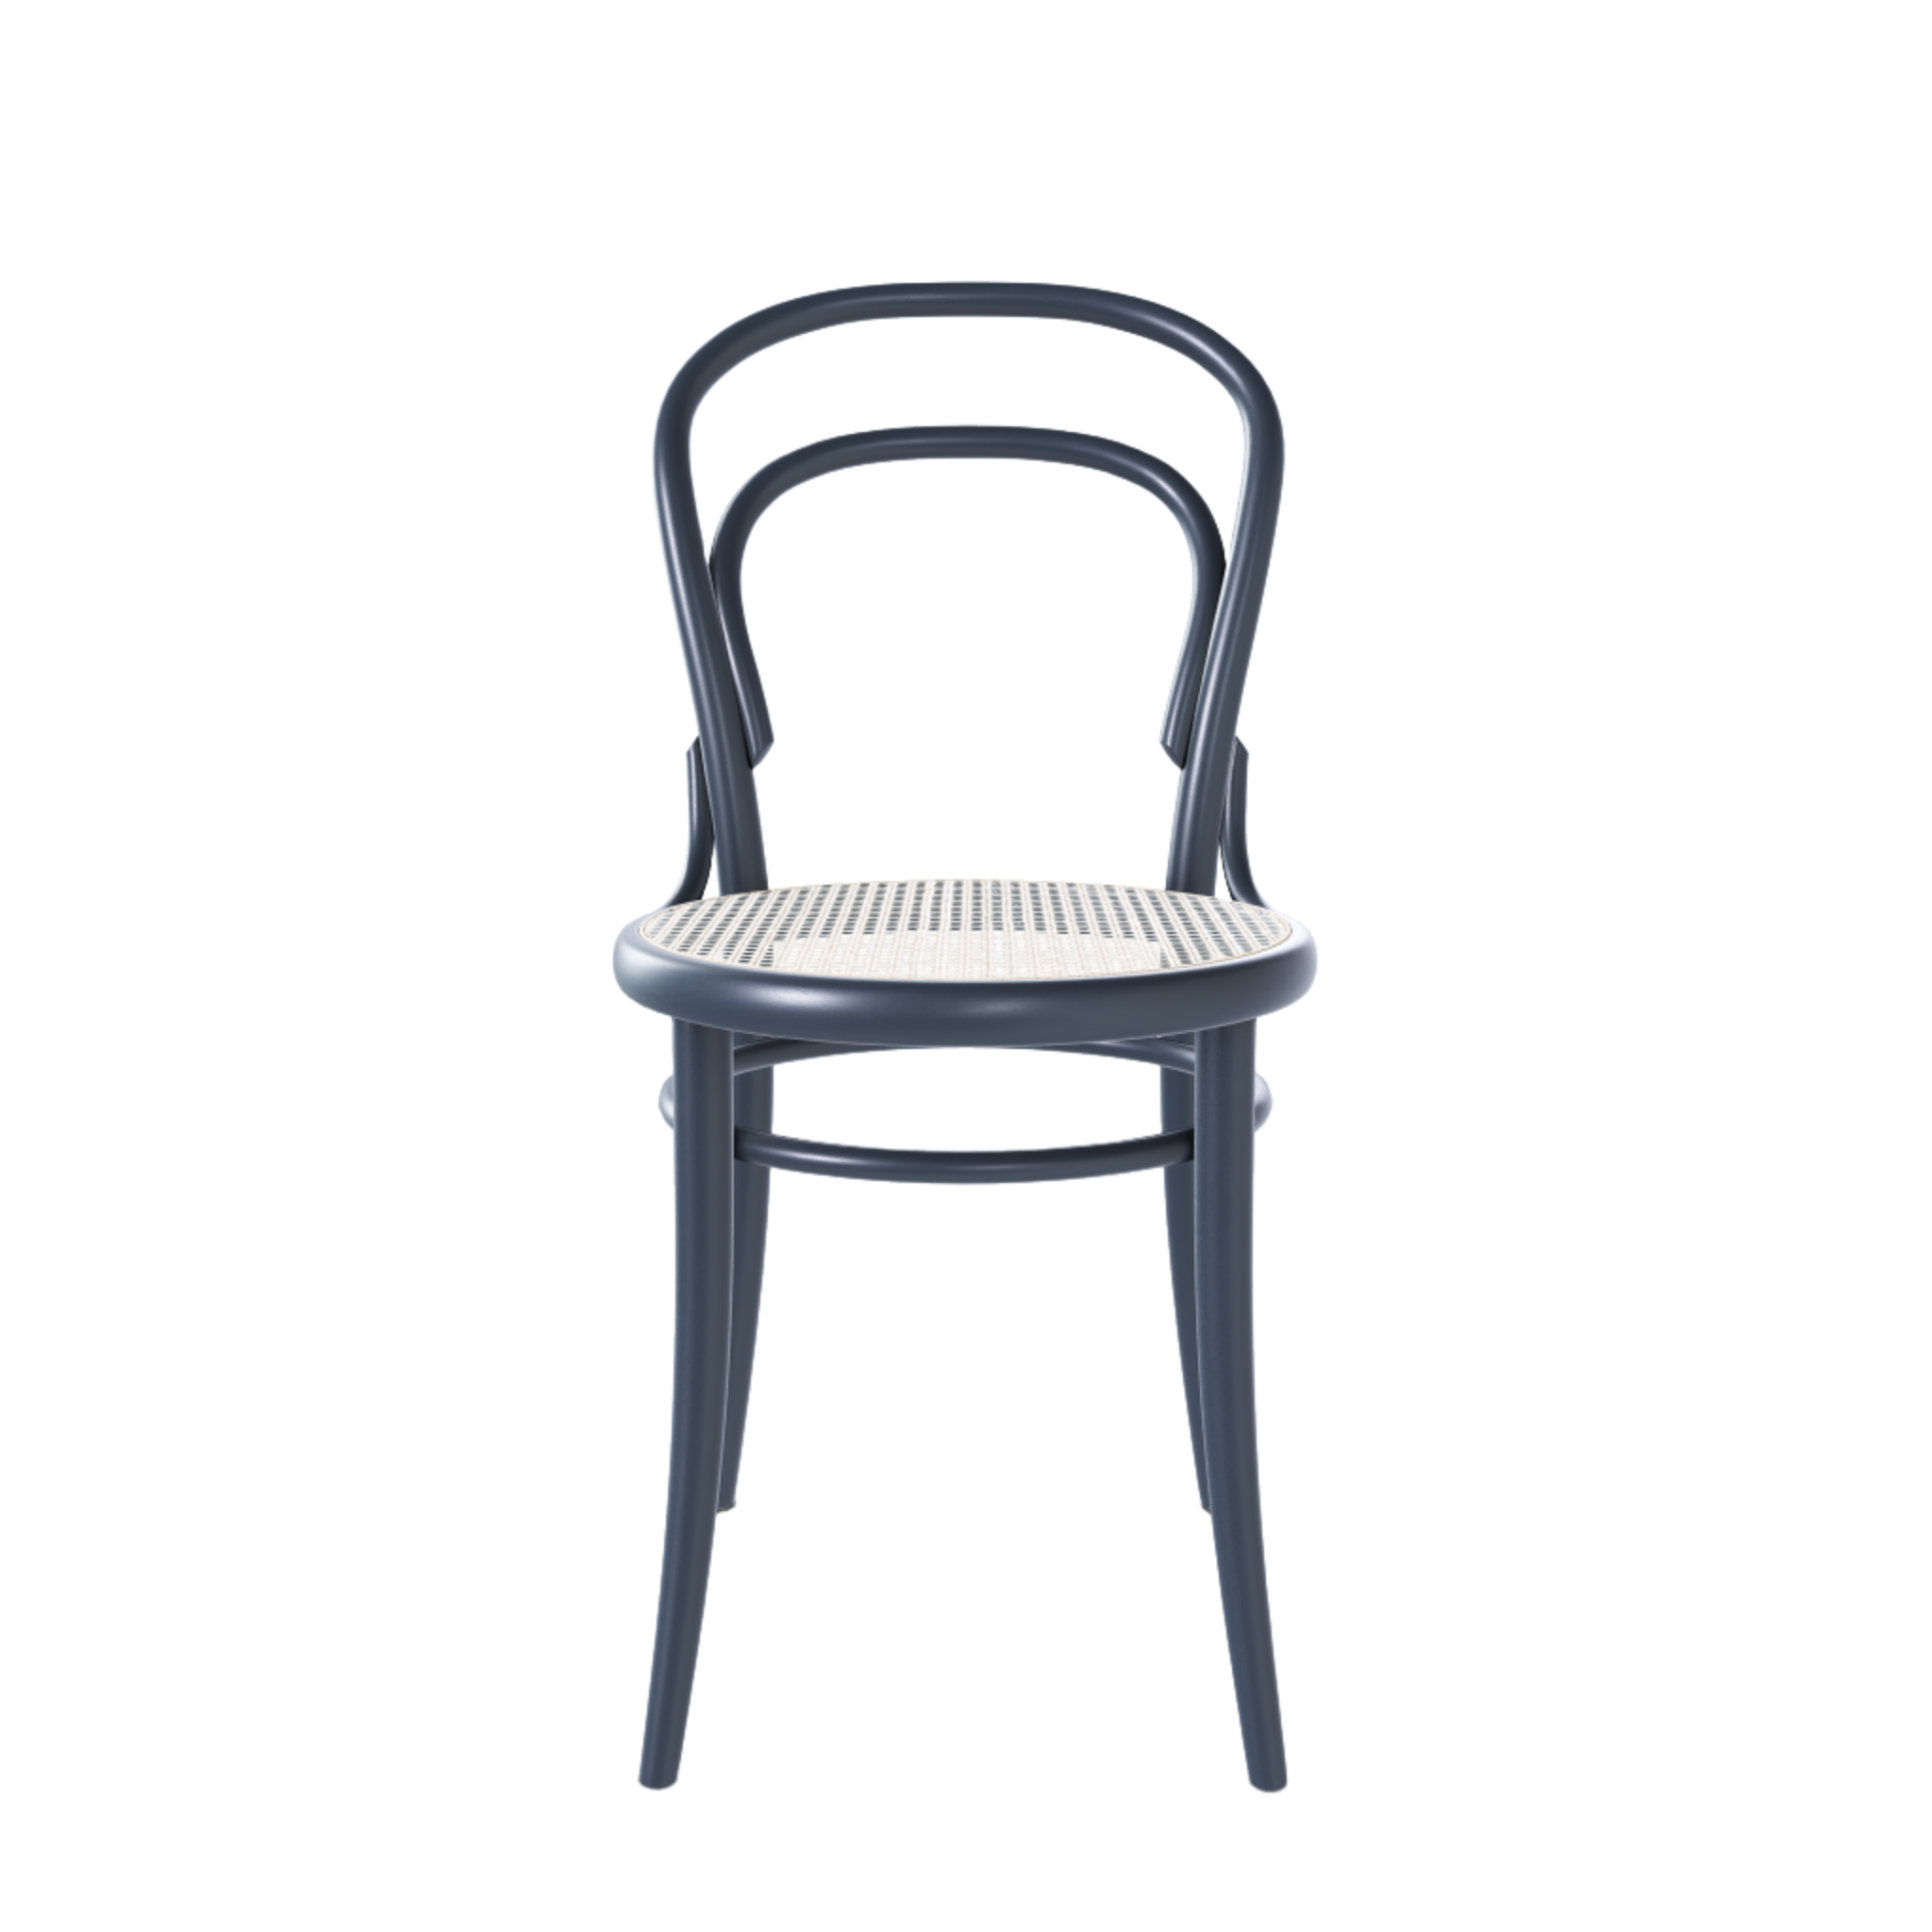 Ton 14 Dining Chair with cane seat in graphite blue